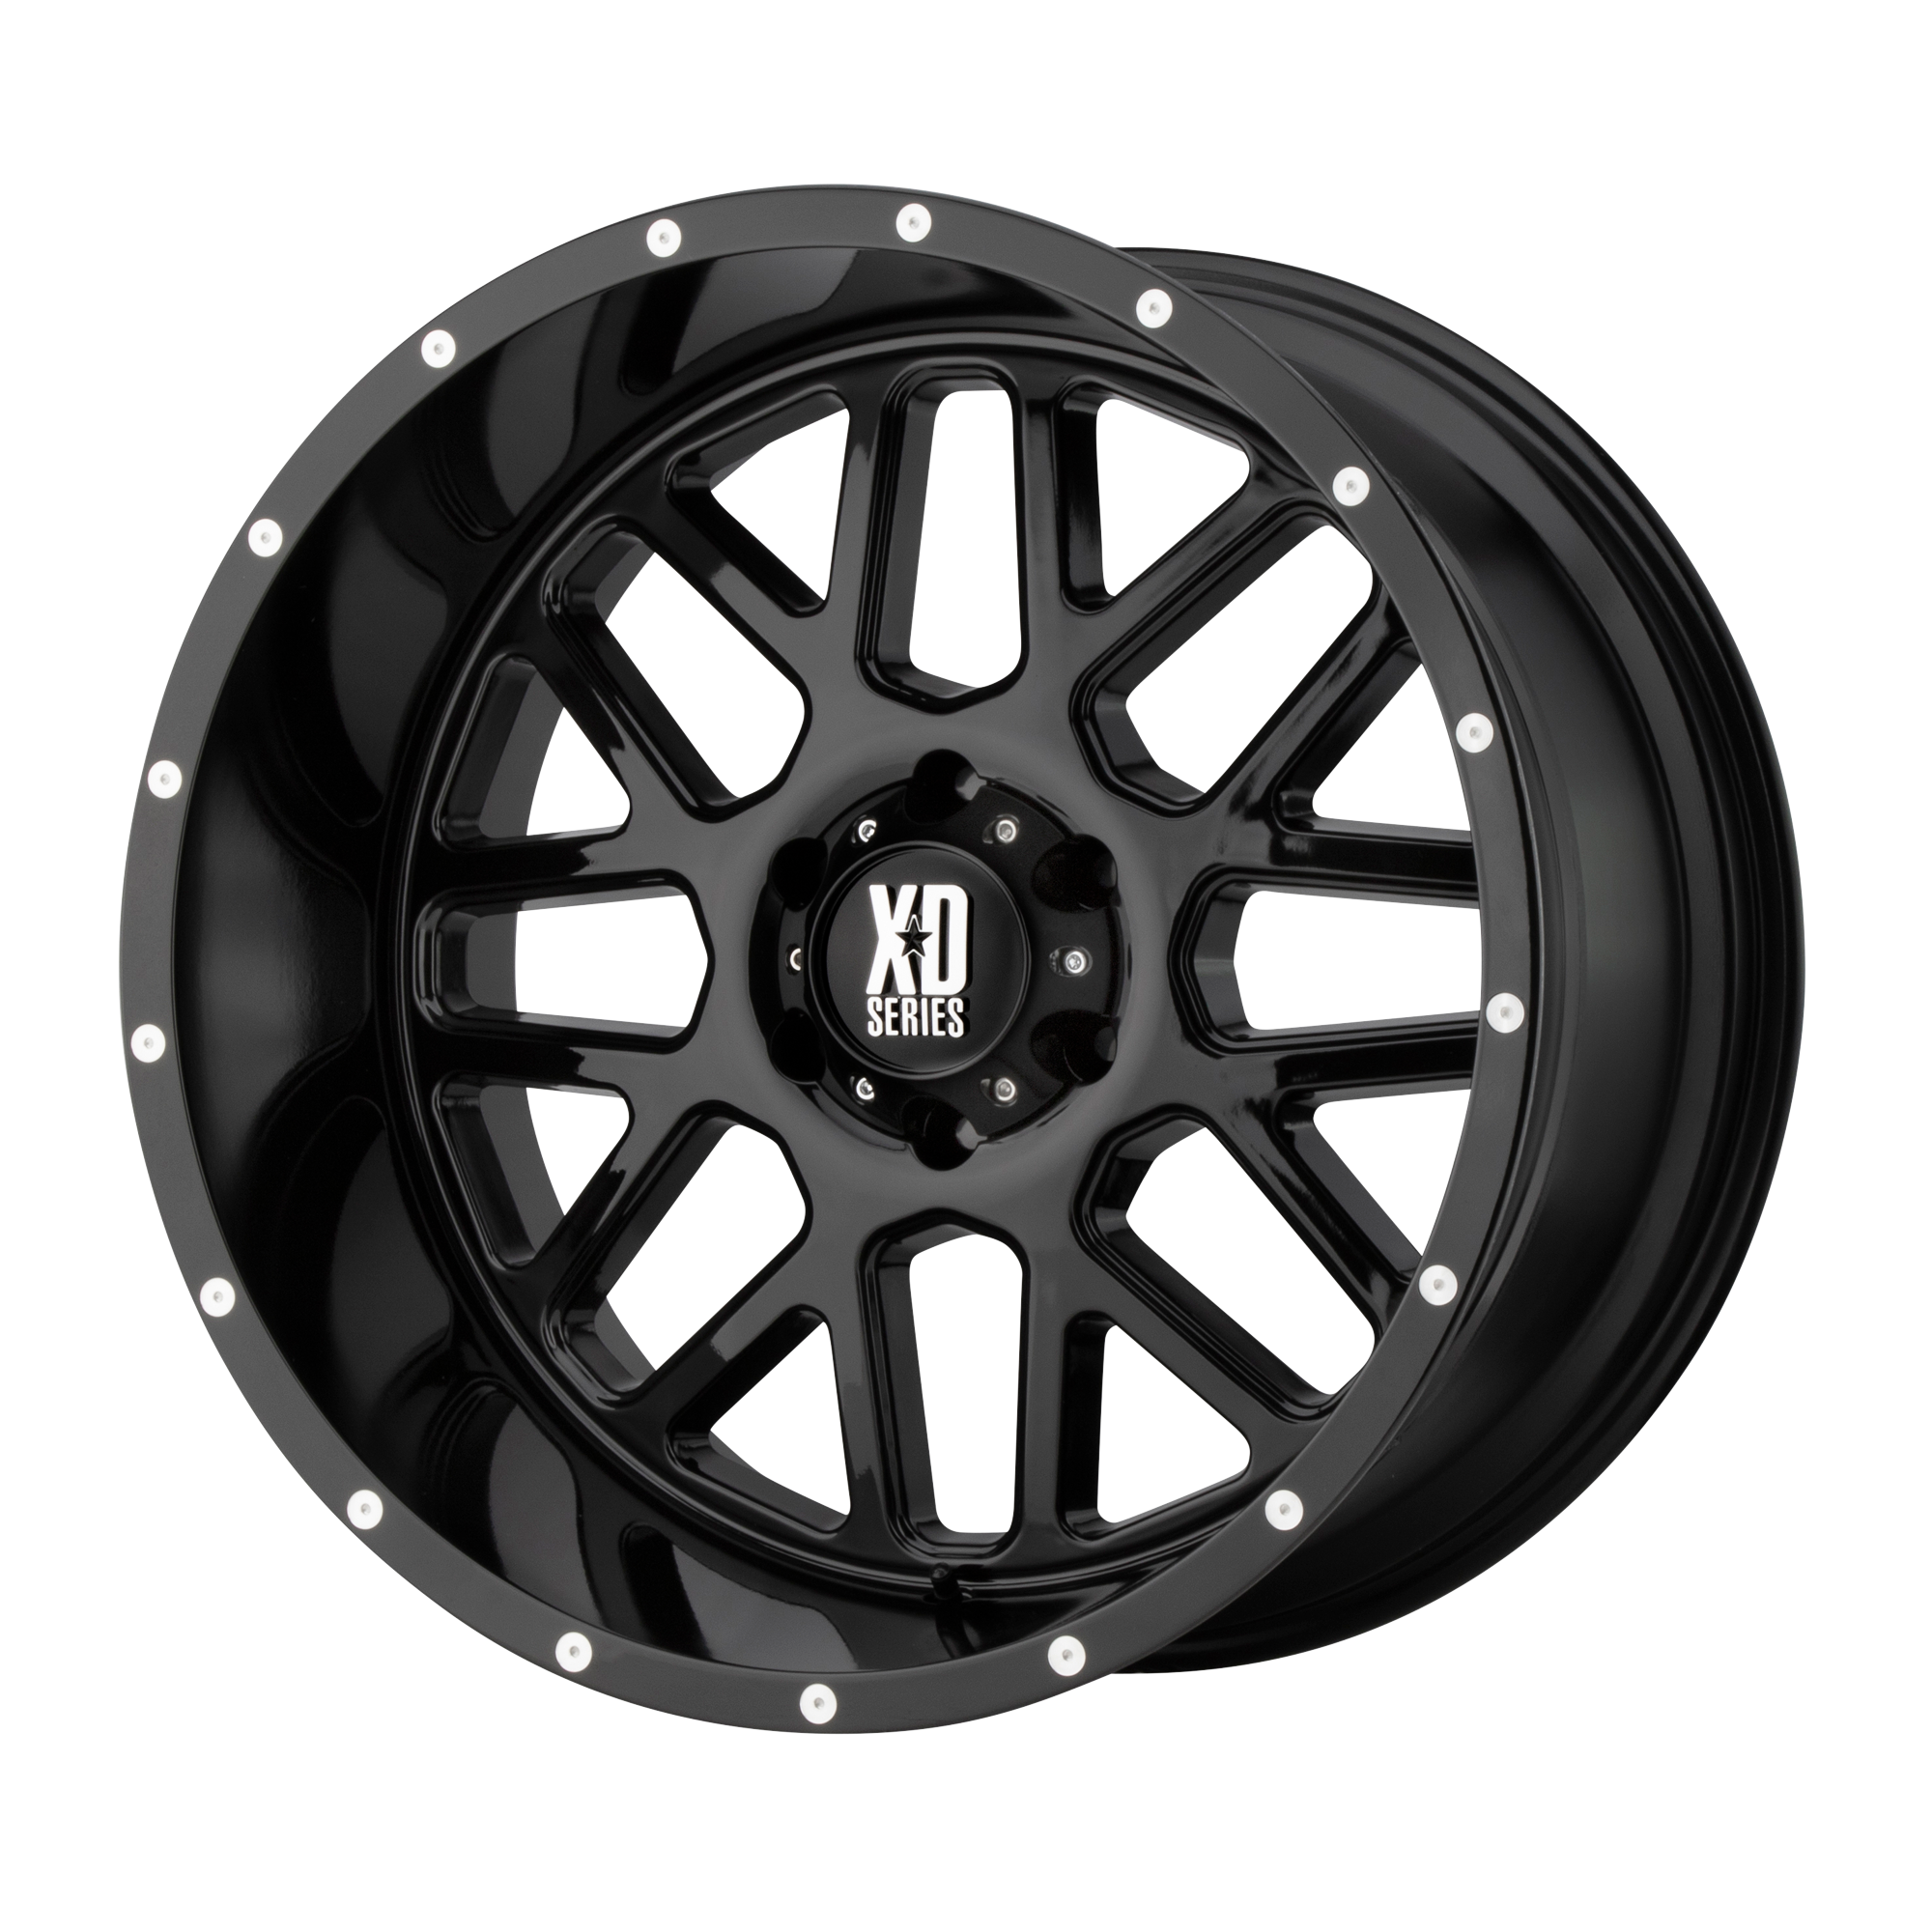 GRENADE 20x12 5x127.00 GLOSS BLACK (-44 mm) - Tires and Engine Performance